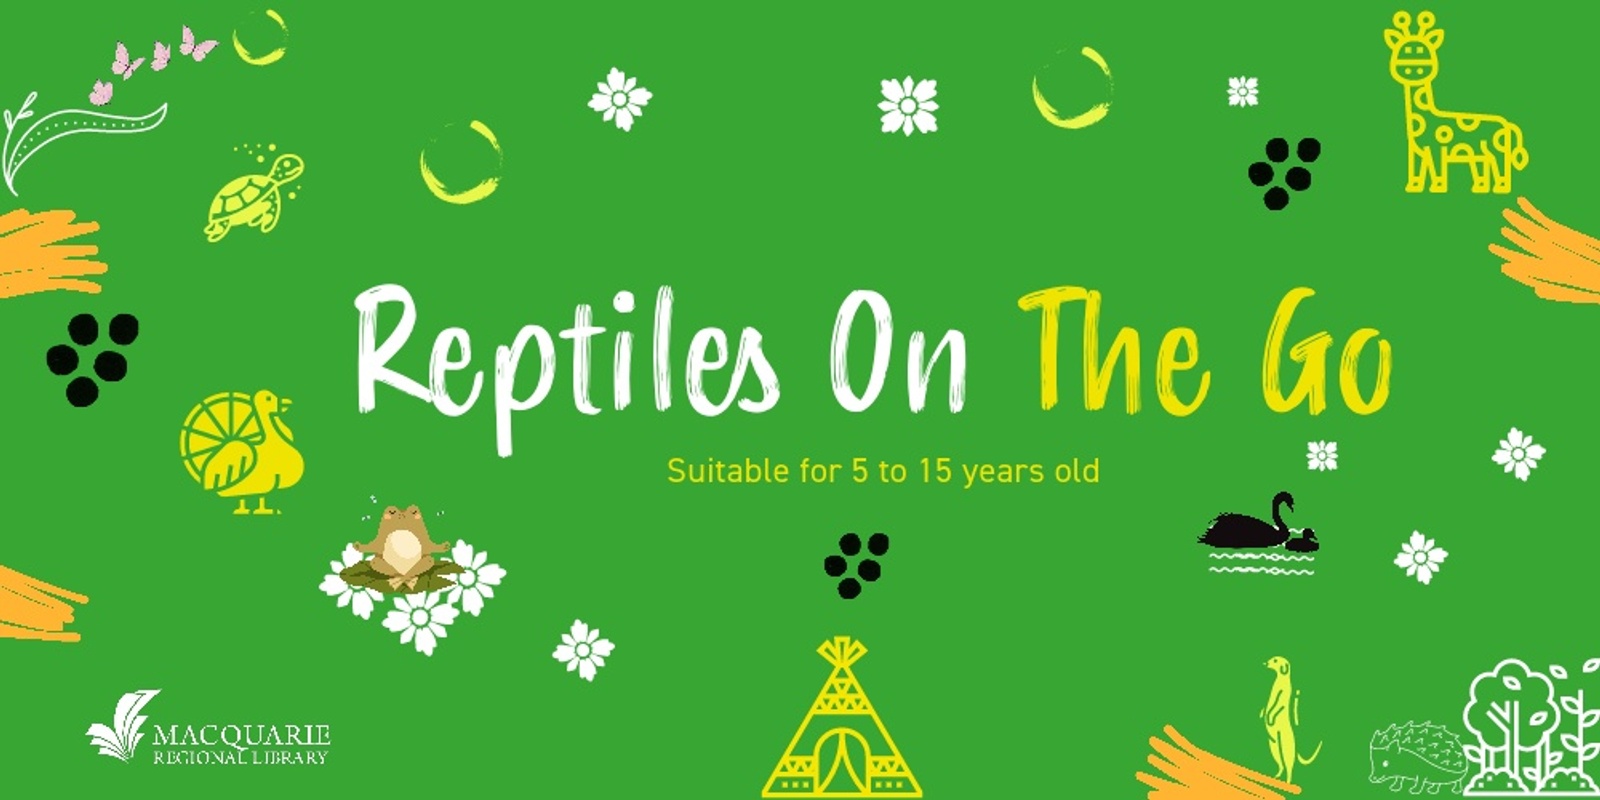 Banner image for Reptiles on the go | Coonabarabran Library